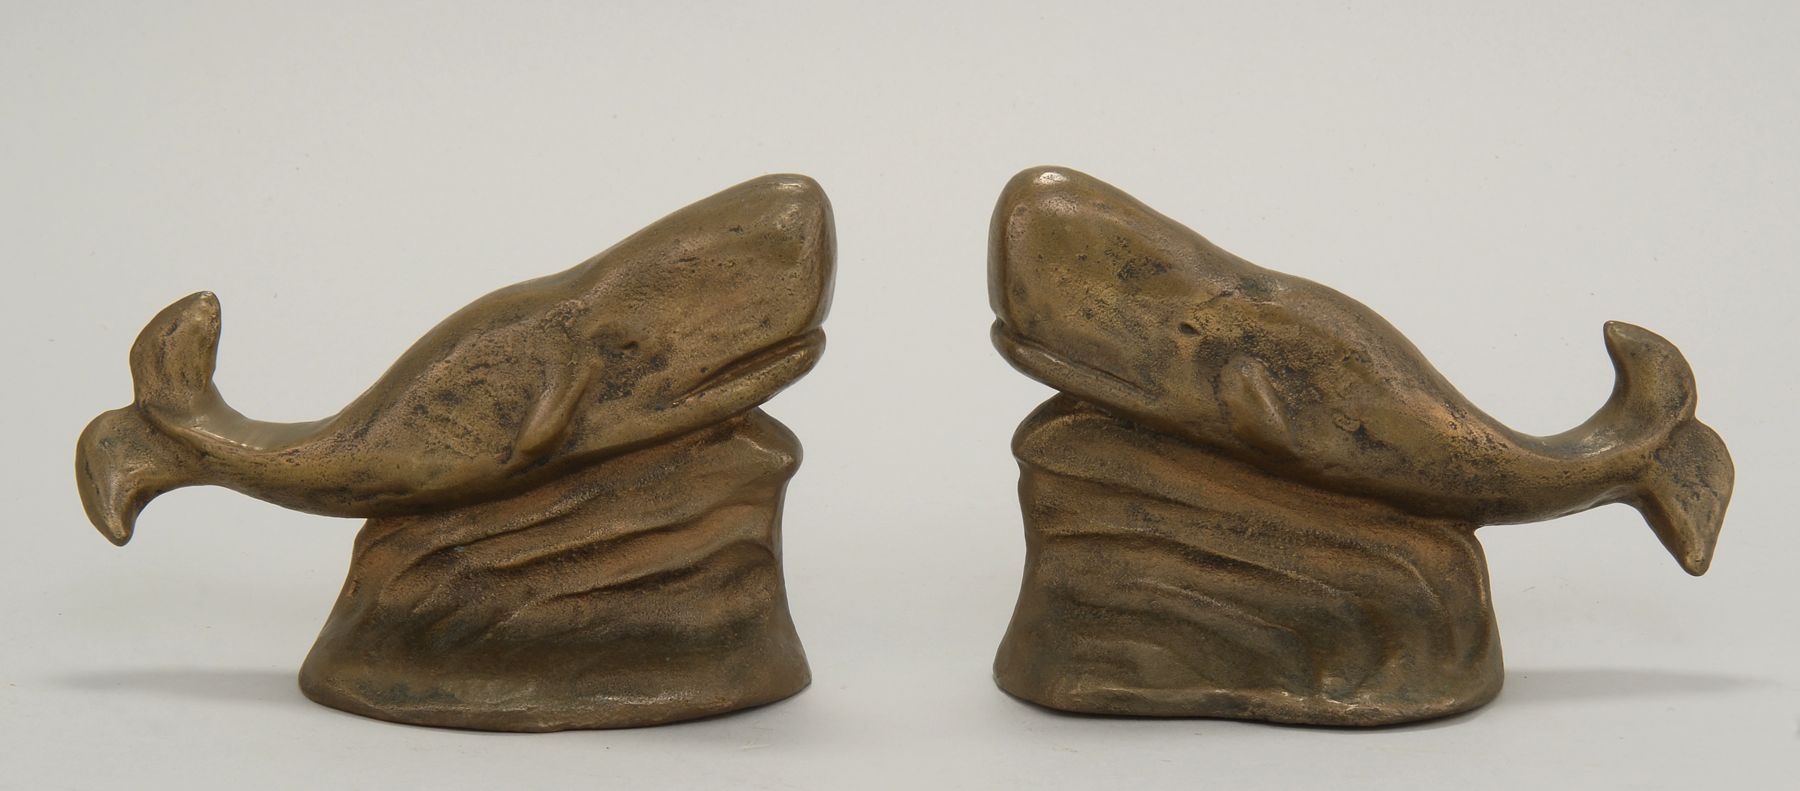 PAIR OF ROYALSTON ARTS WHALE-FORM